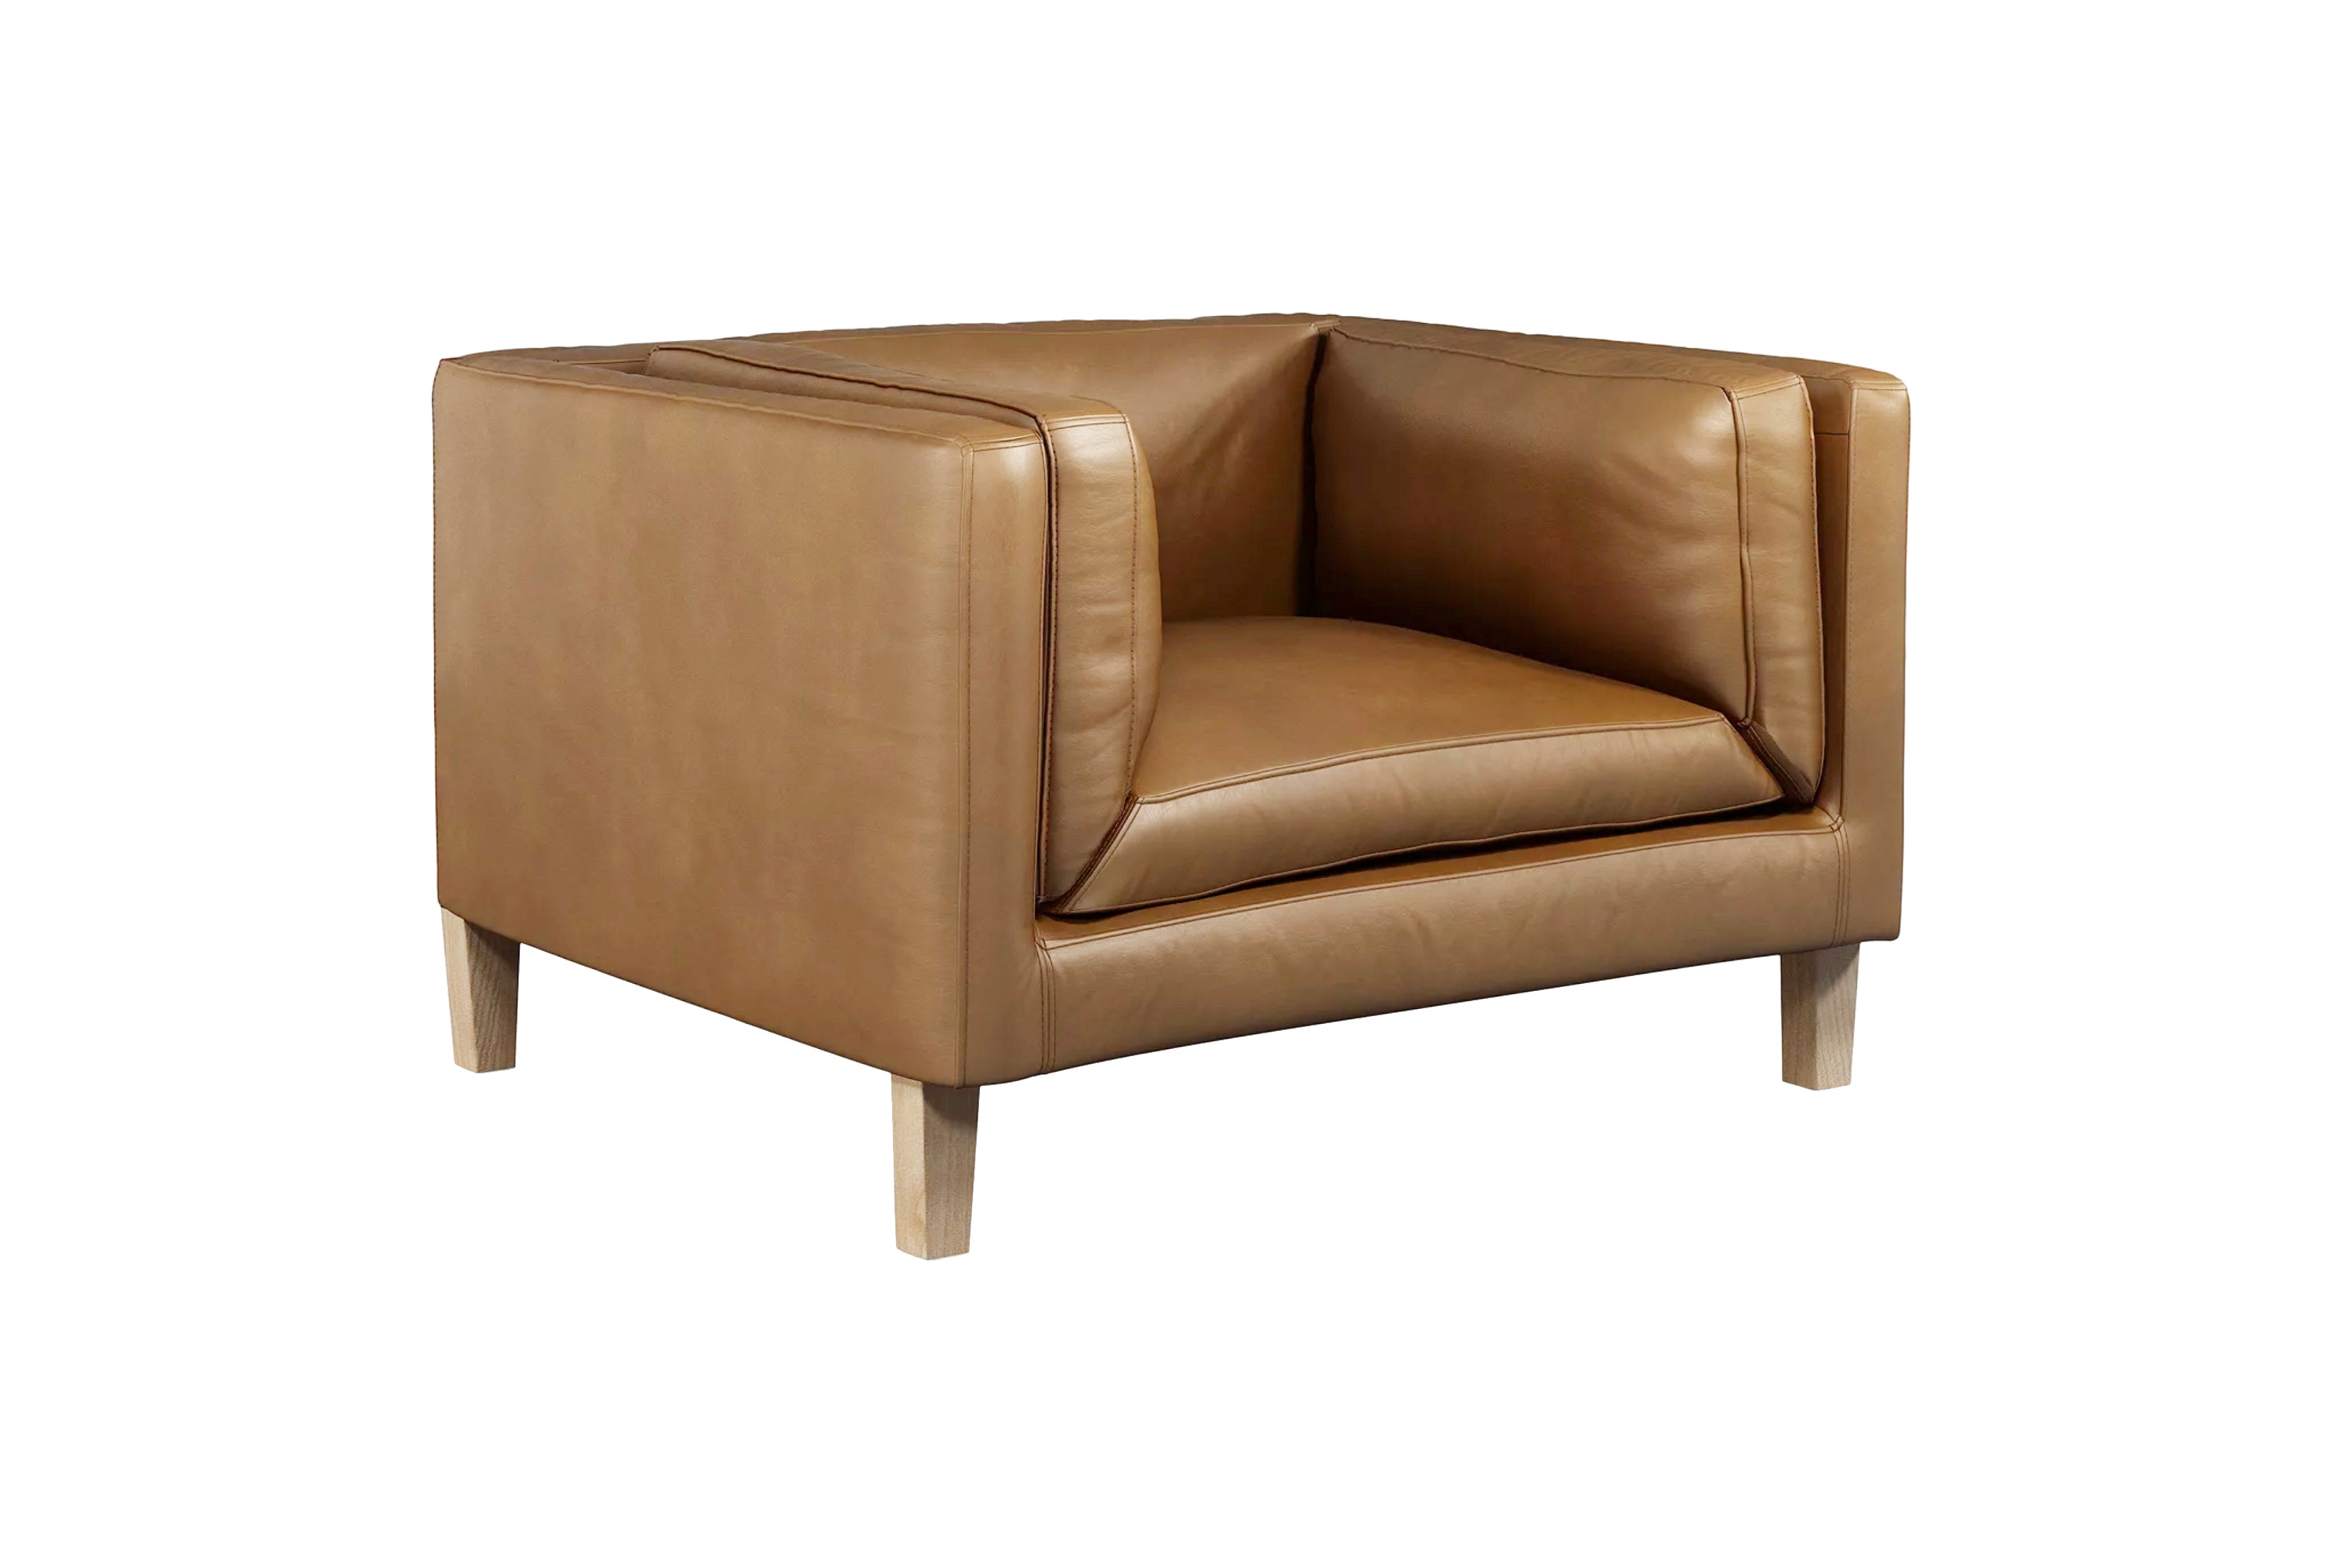 John Lewis Halo Spencer Armchair from Top Secret Furniture